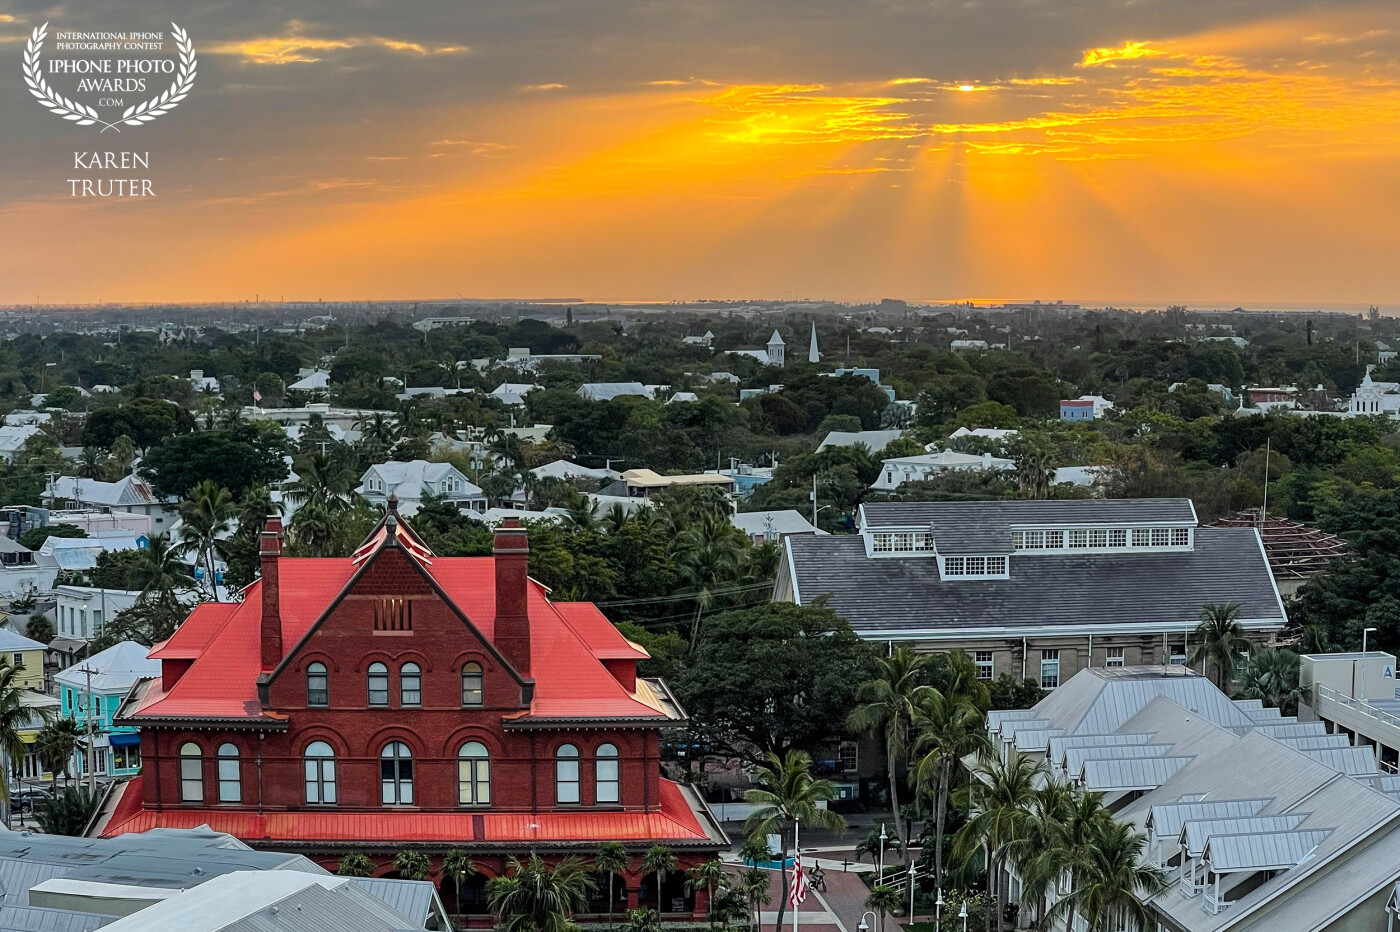 This photo was taken from our balcony on the Celebrity Apex cruise ship as we docked at Key West. The red building is the old Customs House and stood high and proud amongst the rest of the town. The rising sun added its own spectacle to the landscape.